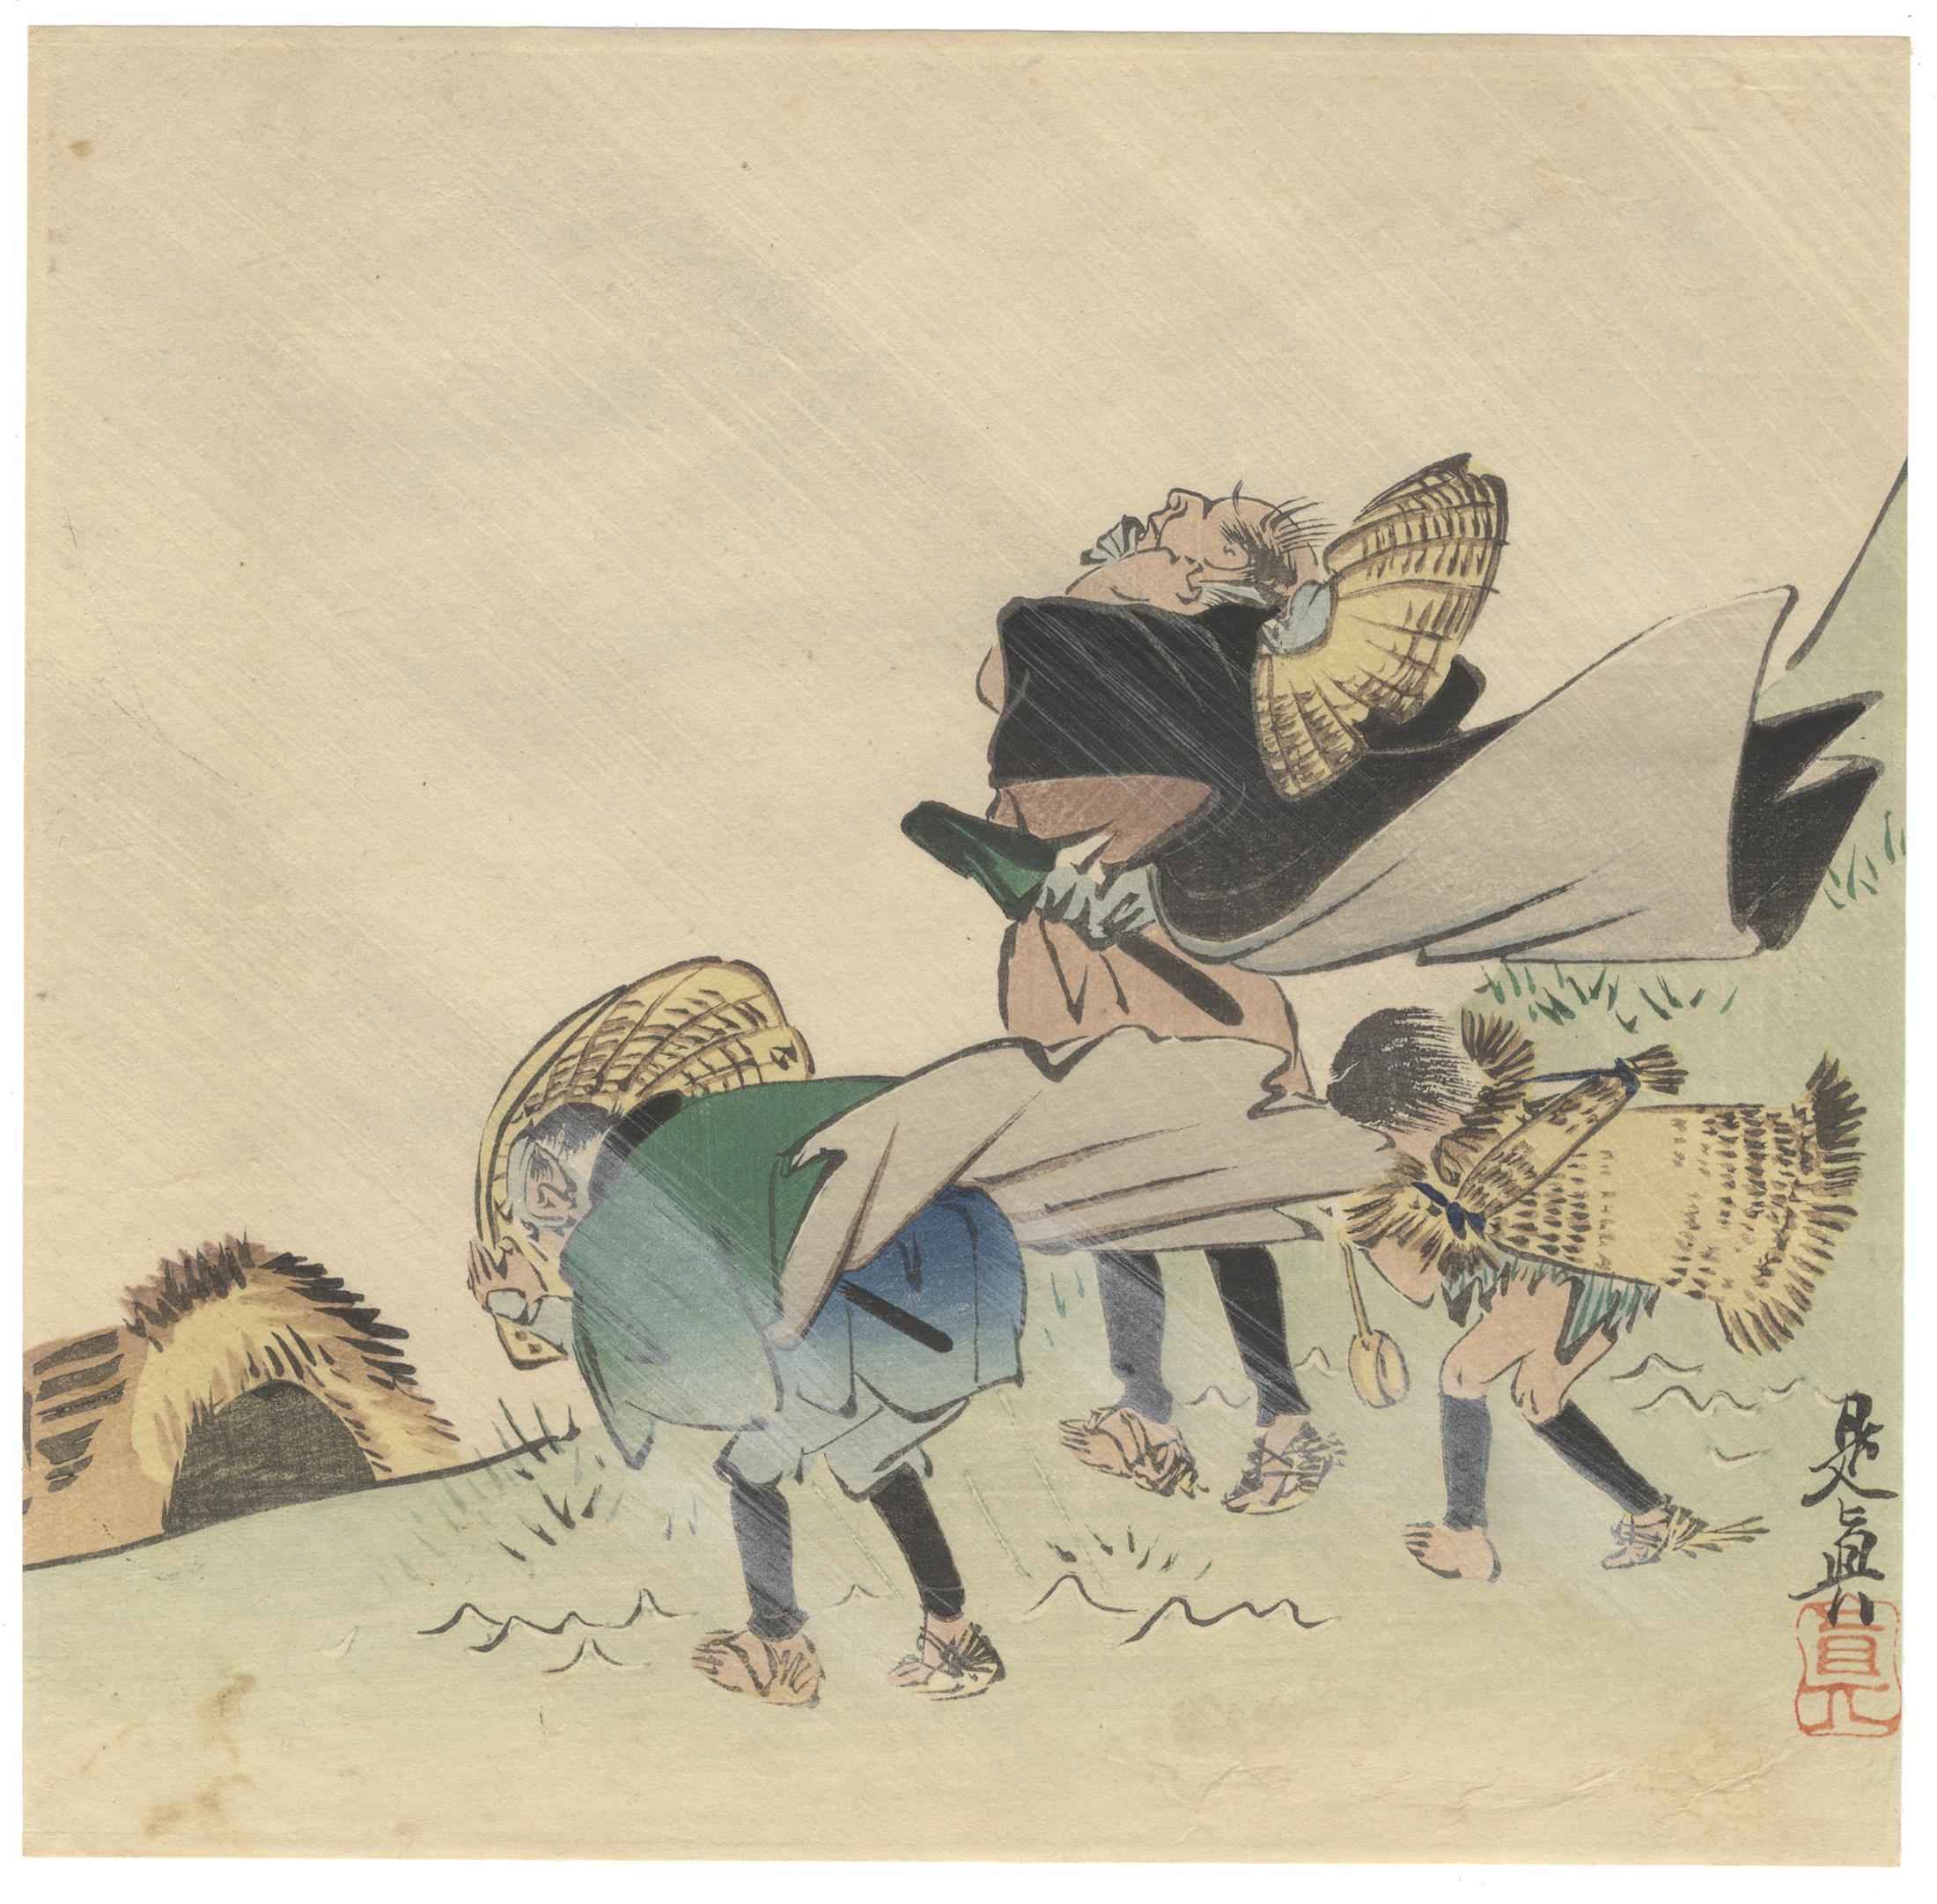 Artist: Zeshin Shibata (1807 - 1891)
Title: Three travelers caught in the wind
Date: late 19th century
Size: 23.5 x 22.7 cm
Condition: Slightly trimmed. Light creases and minor brown stains. 

The son of a sculptor, Zeshin was born and lived in Edo.